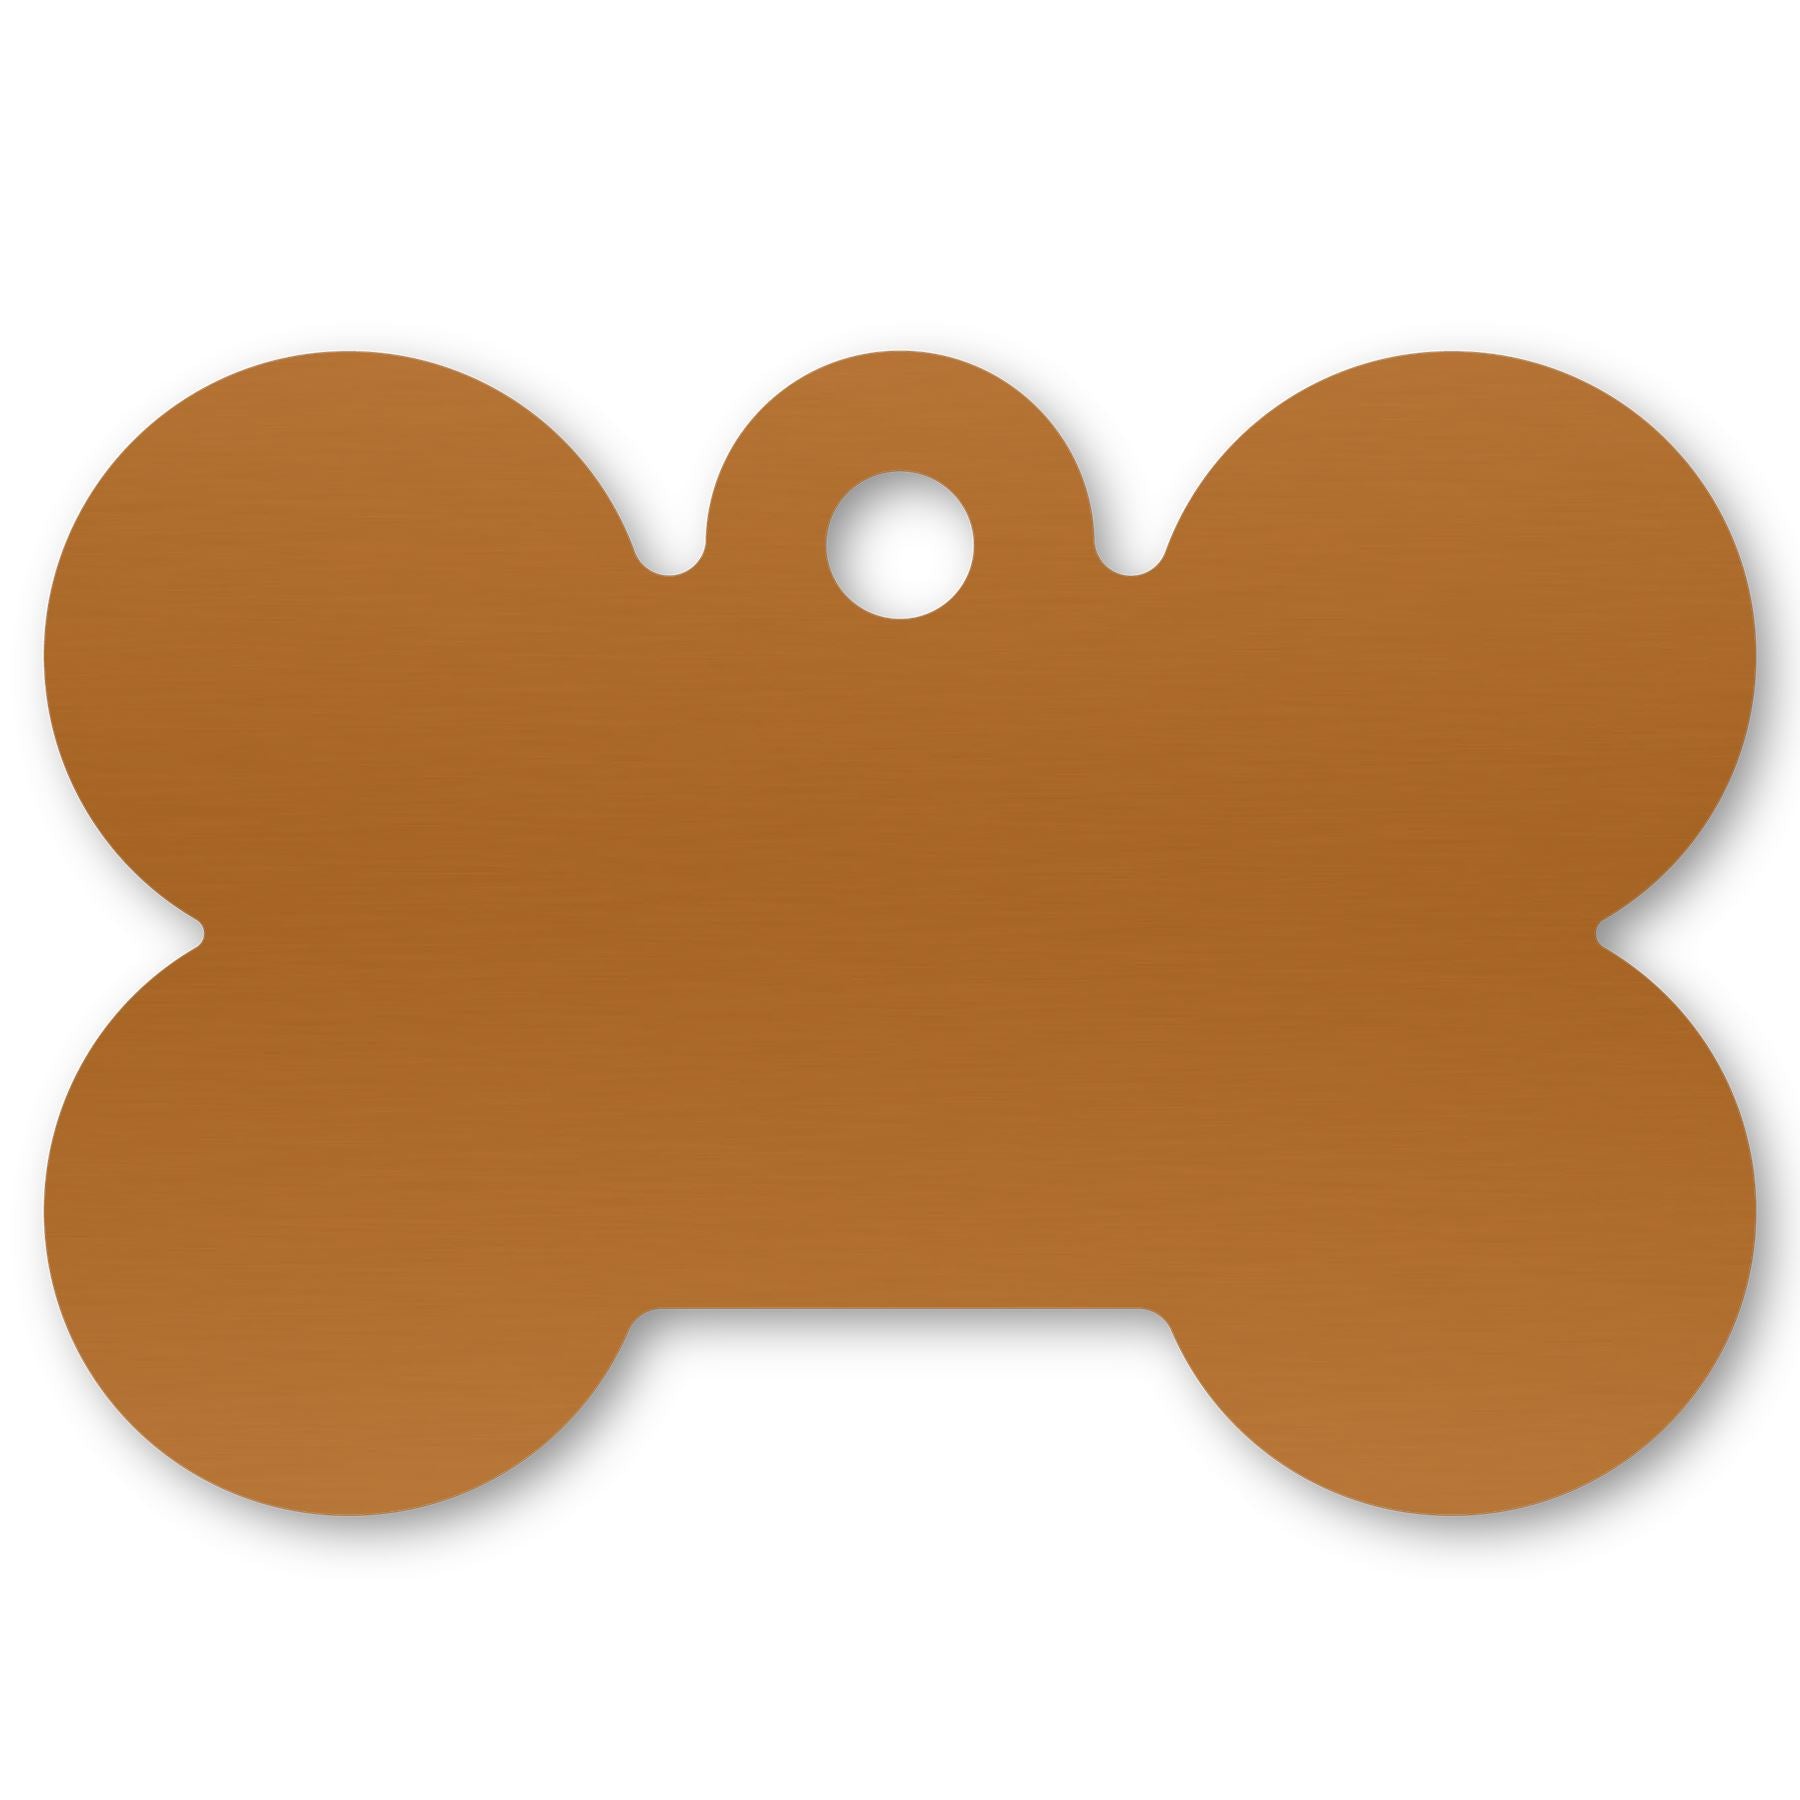 Anodized Aluminum Dog Bone Shaped Tags, 1-1/16" x 1-9/16" with 1/8" Hole, Laser Engraved Metal Tags Craftworks NW Orange 